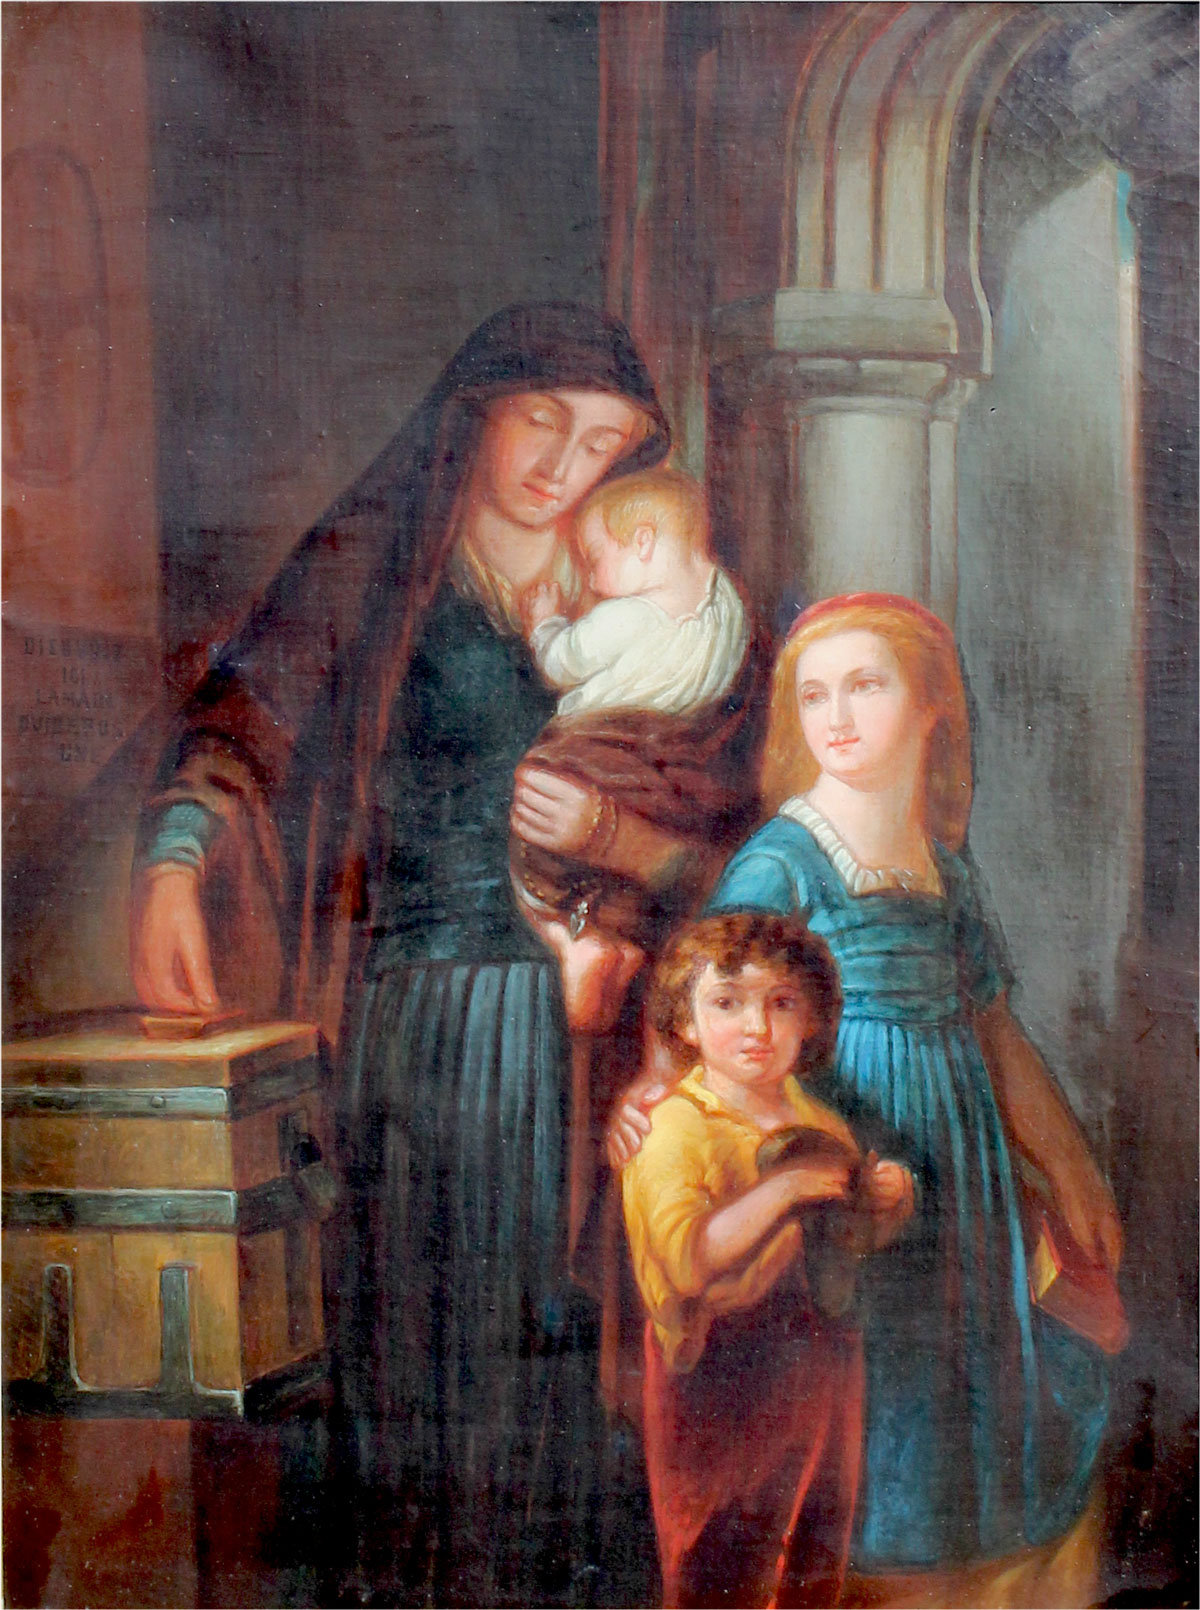 19TH CENTURY GENRE PAINTING WITH 36e94a